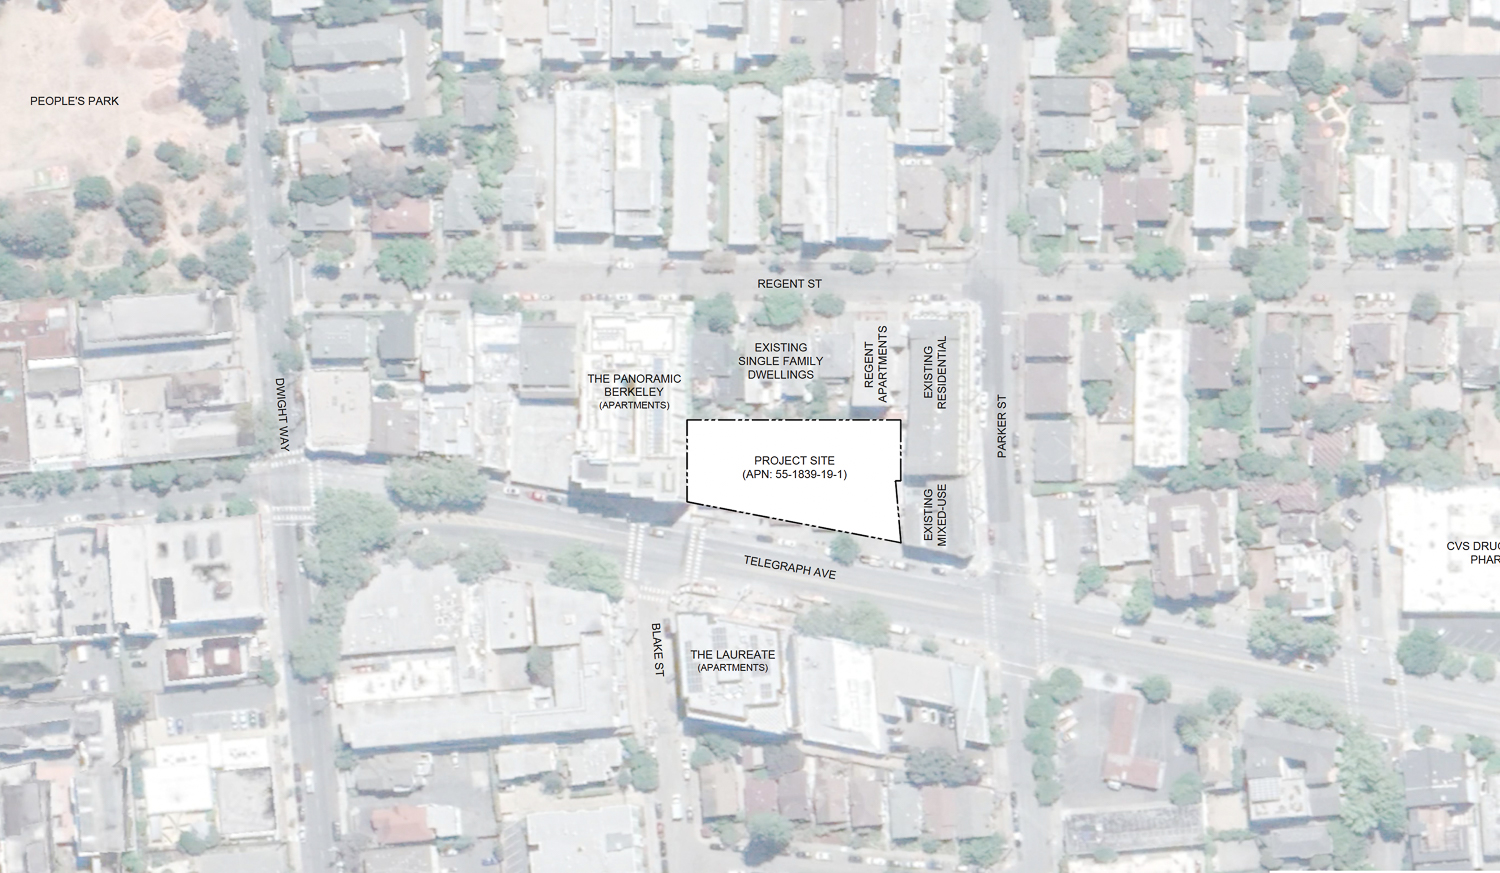 2587 Telegraph Avenue site with area context, illustration by KTGY